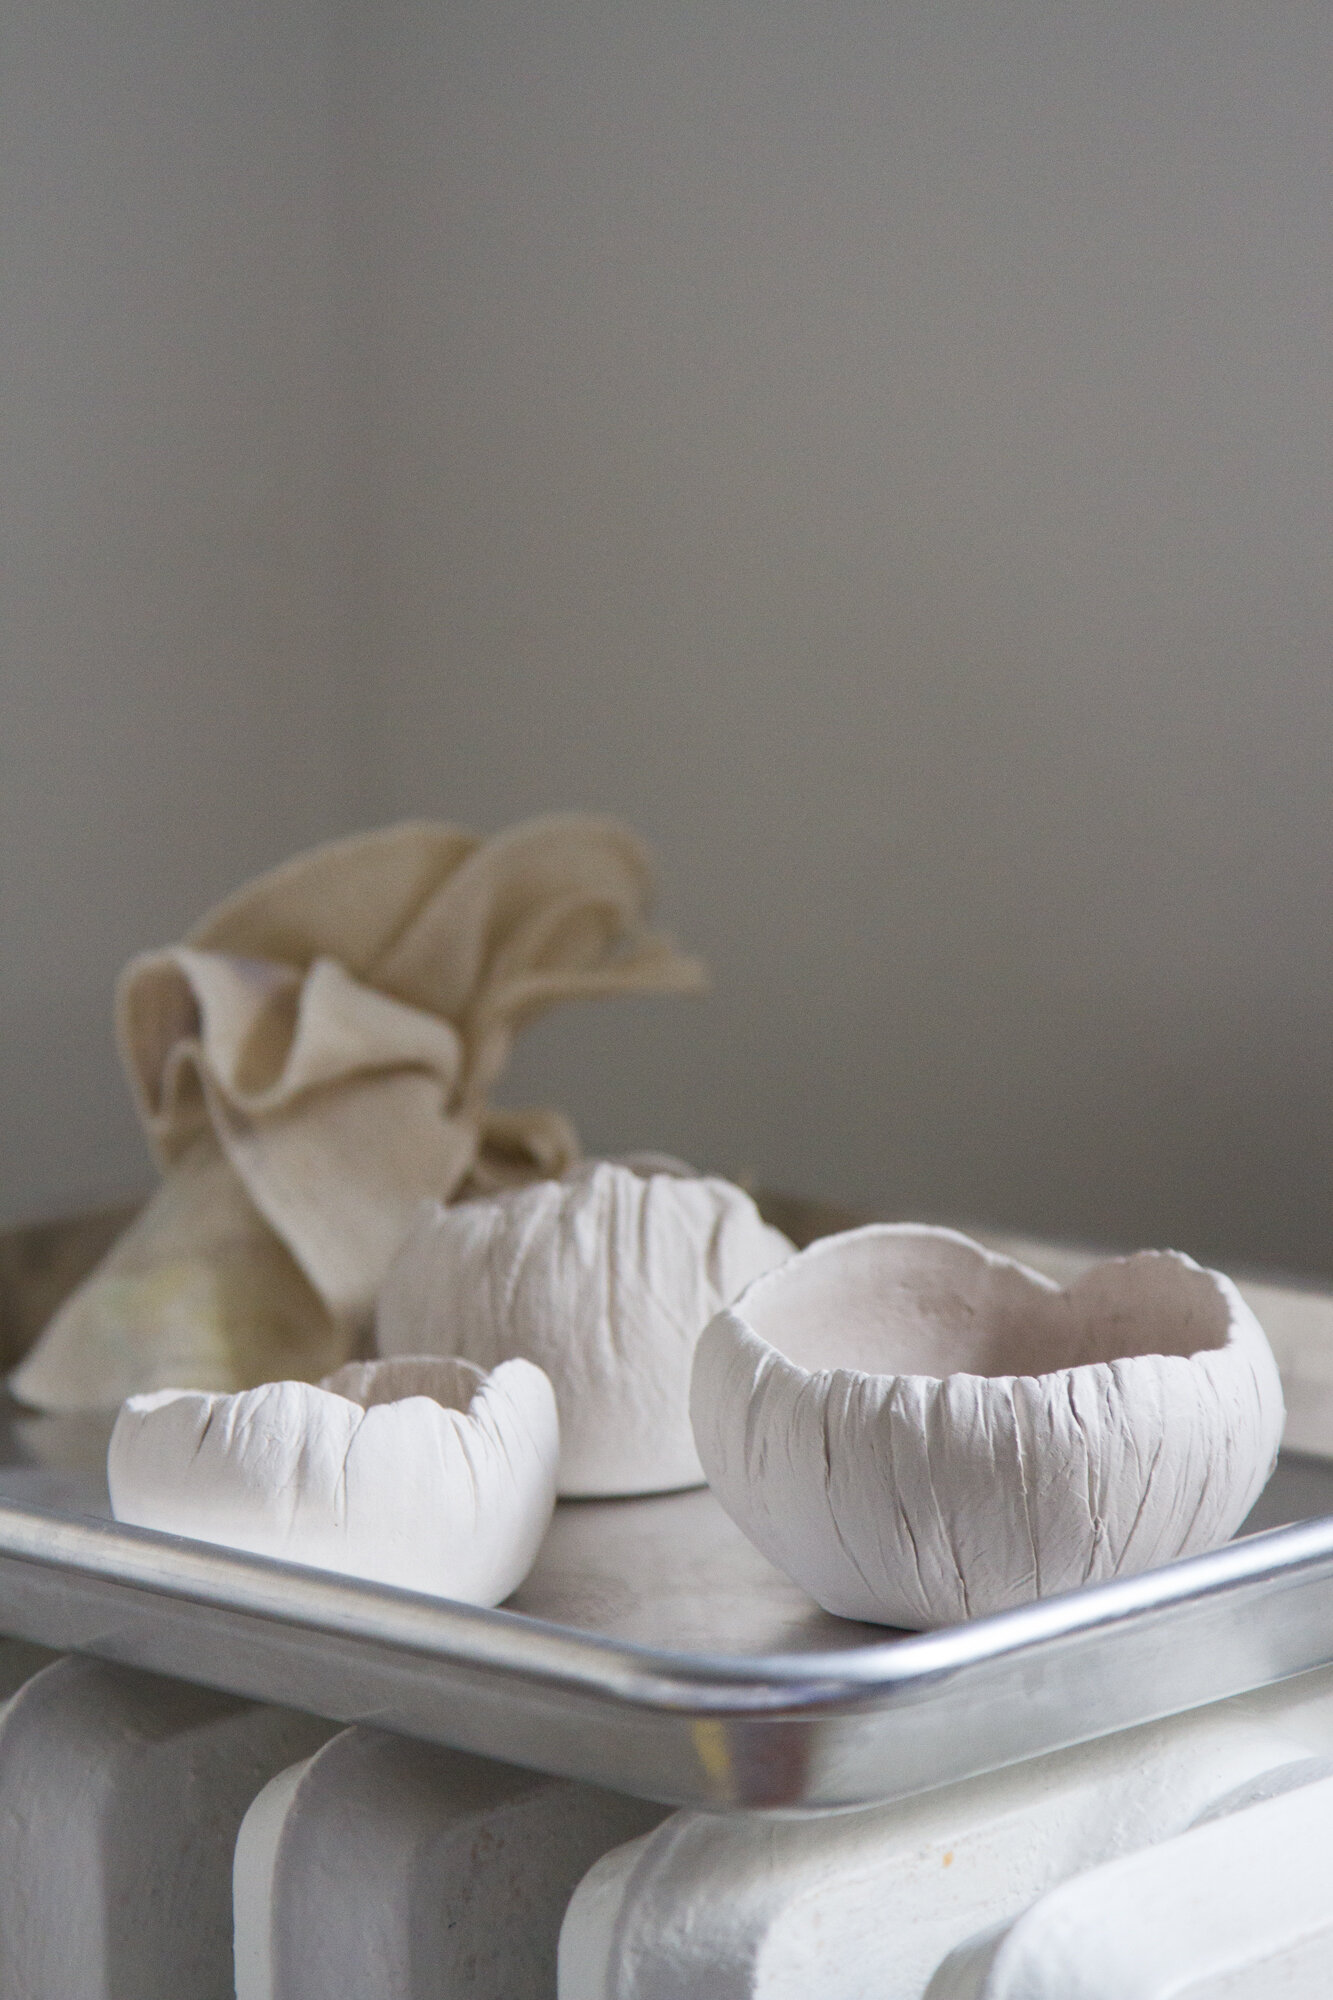 handmade clay vessels drying | reading my tea leaves